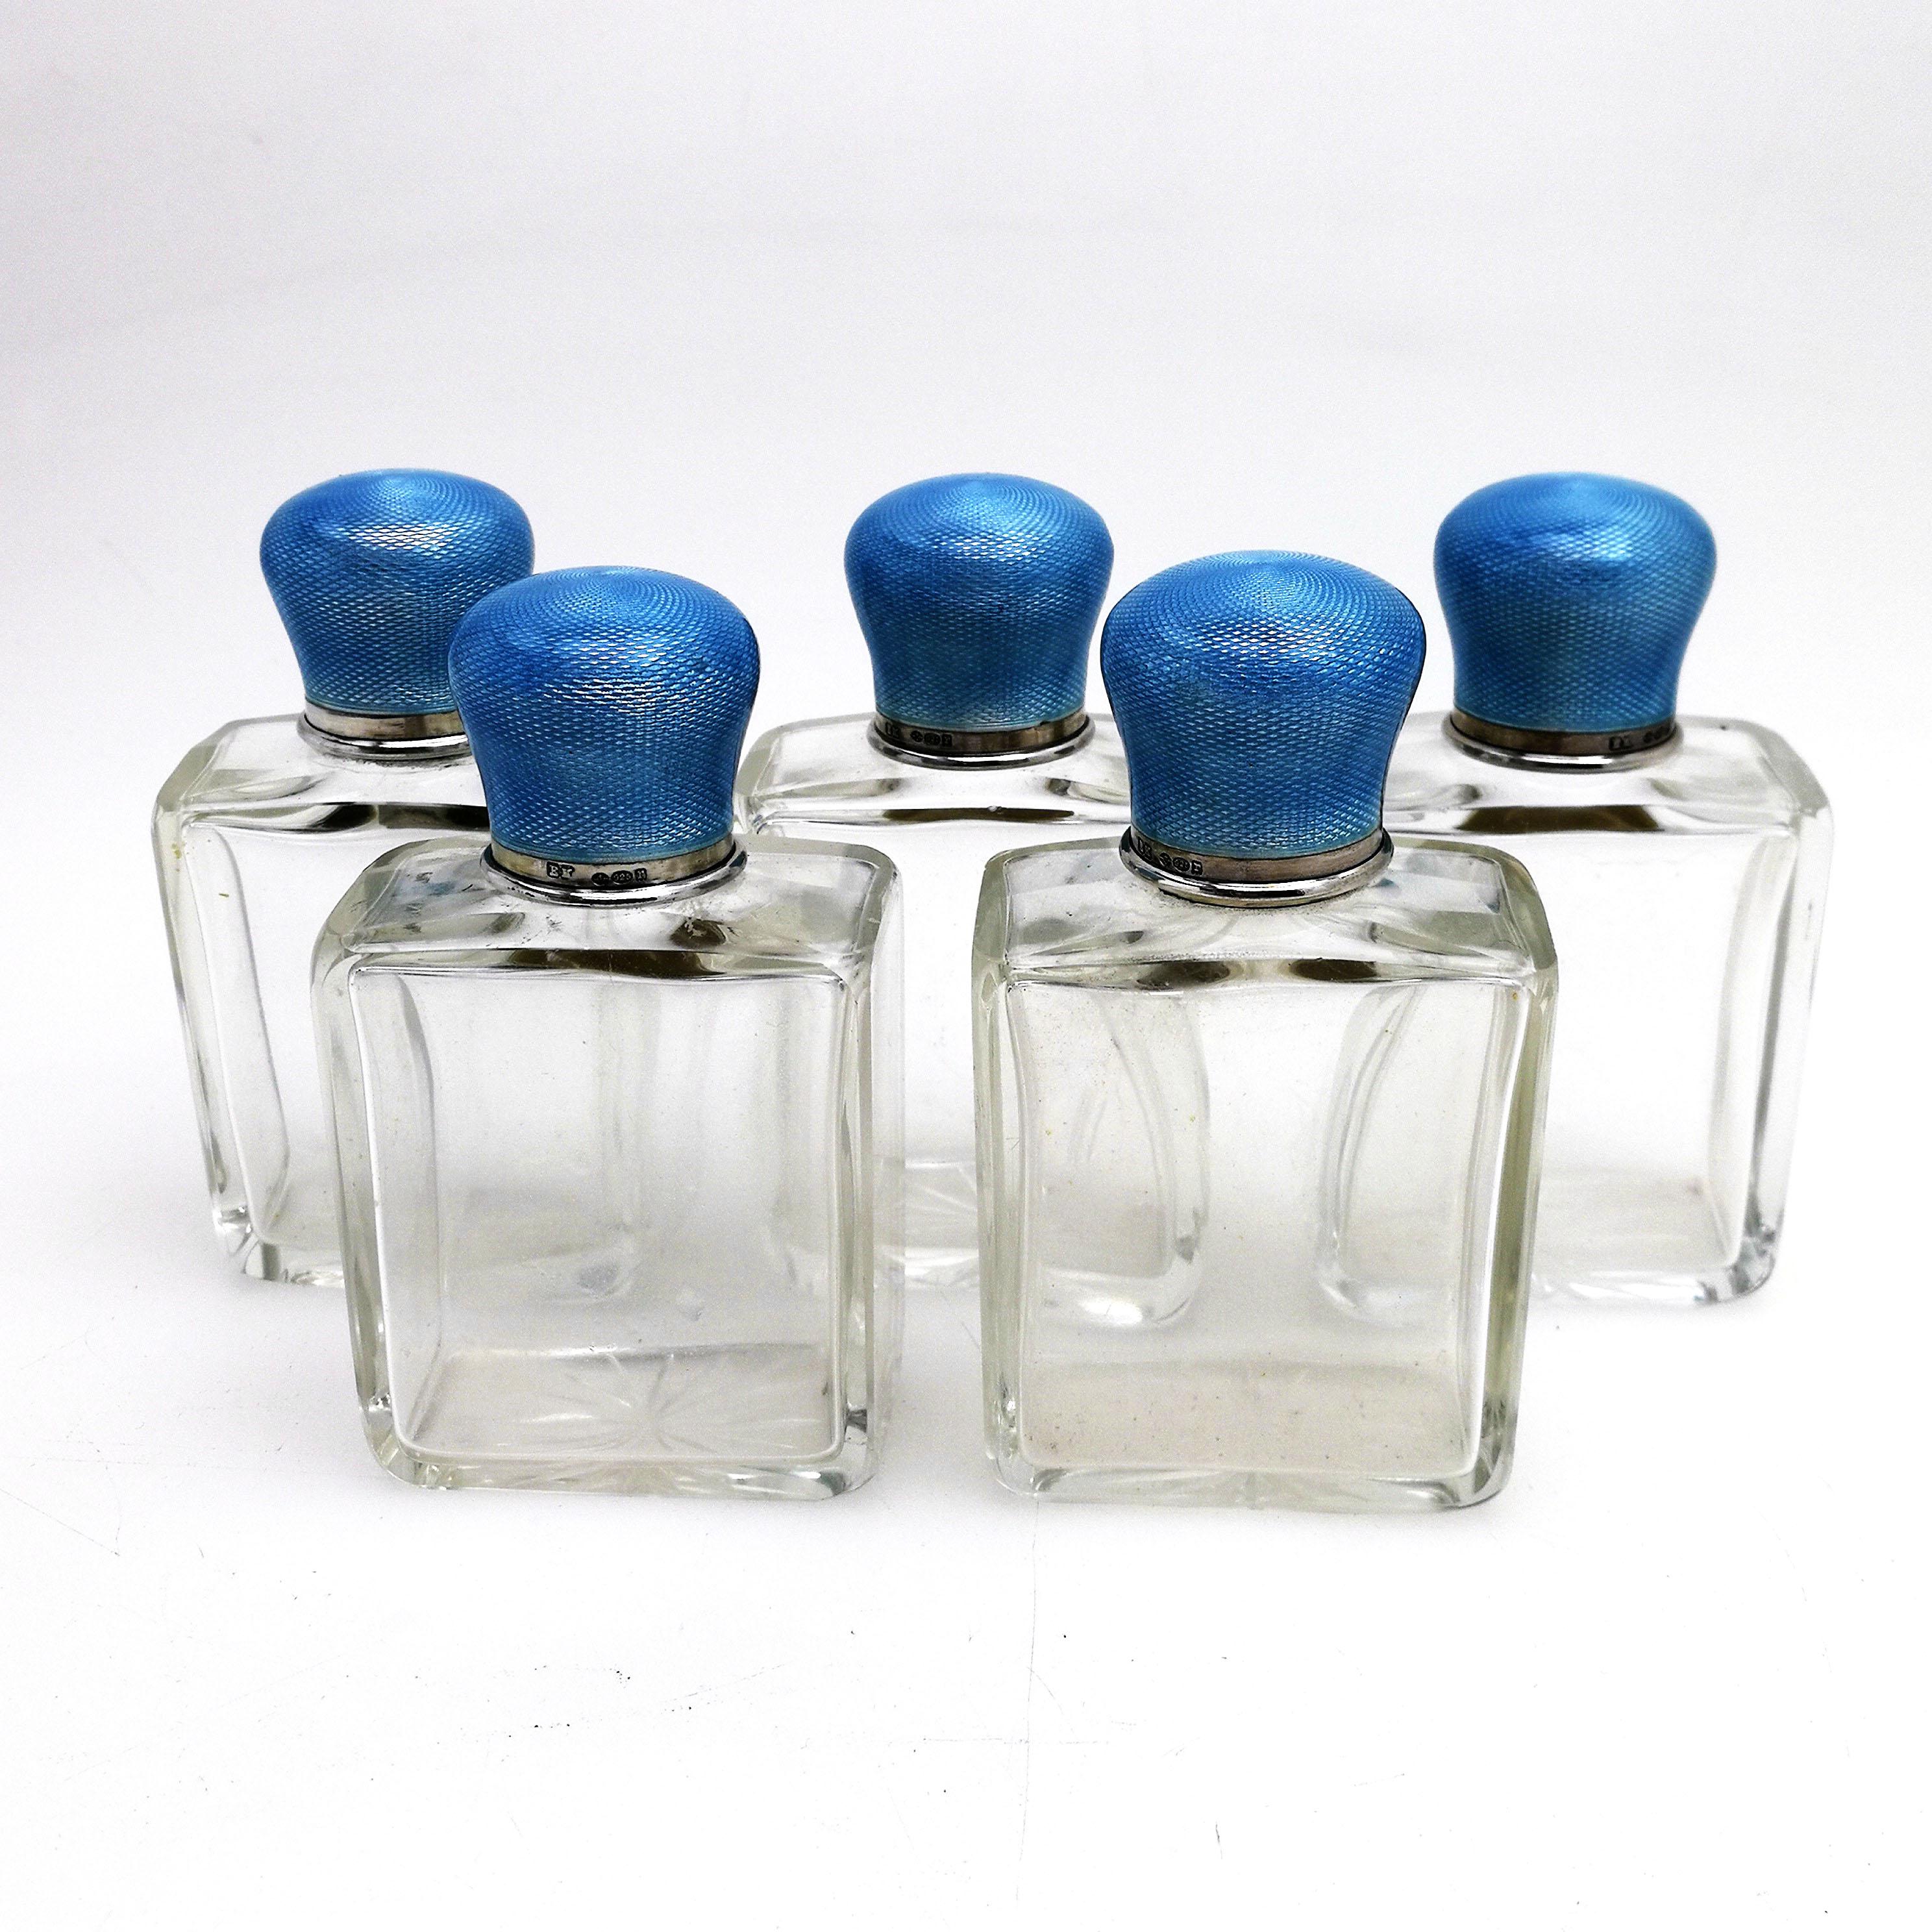 Set of 5 Silver and Enamel Topped Glass Scent Bottles 1912 Perfume / Cosmetics In Good Condition For Sale In London, GB